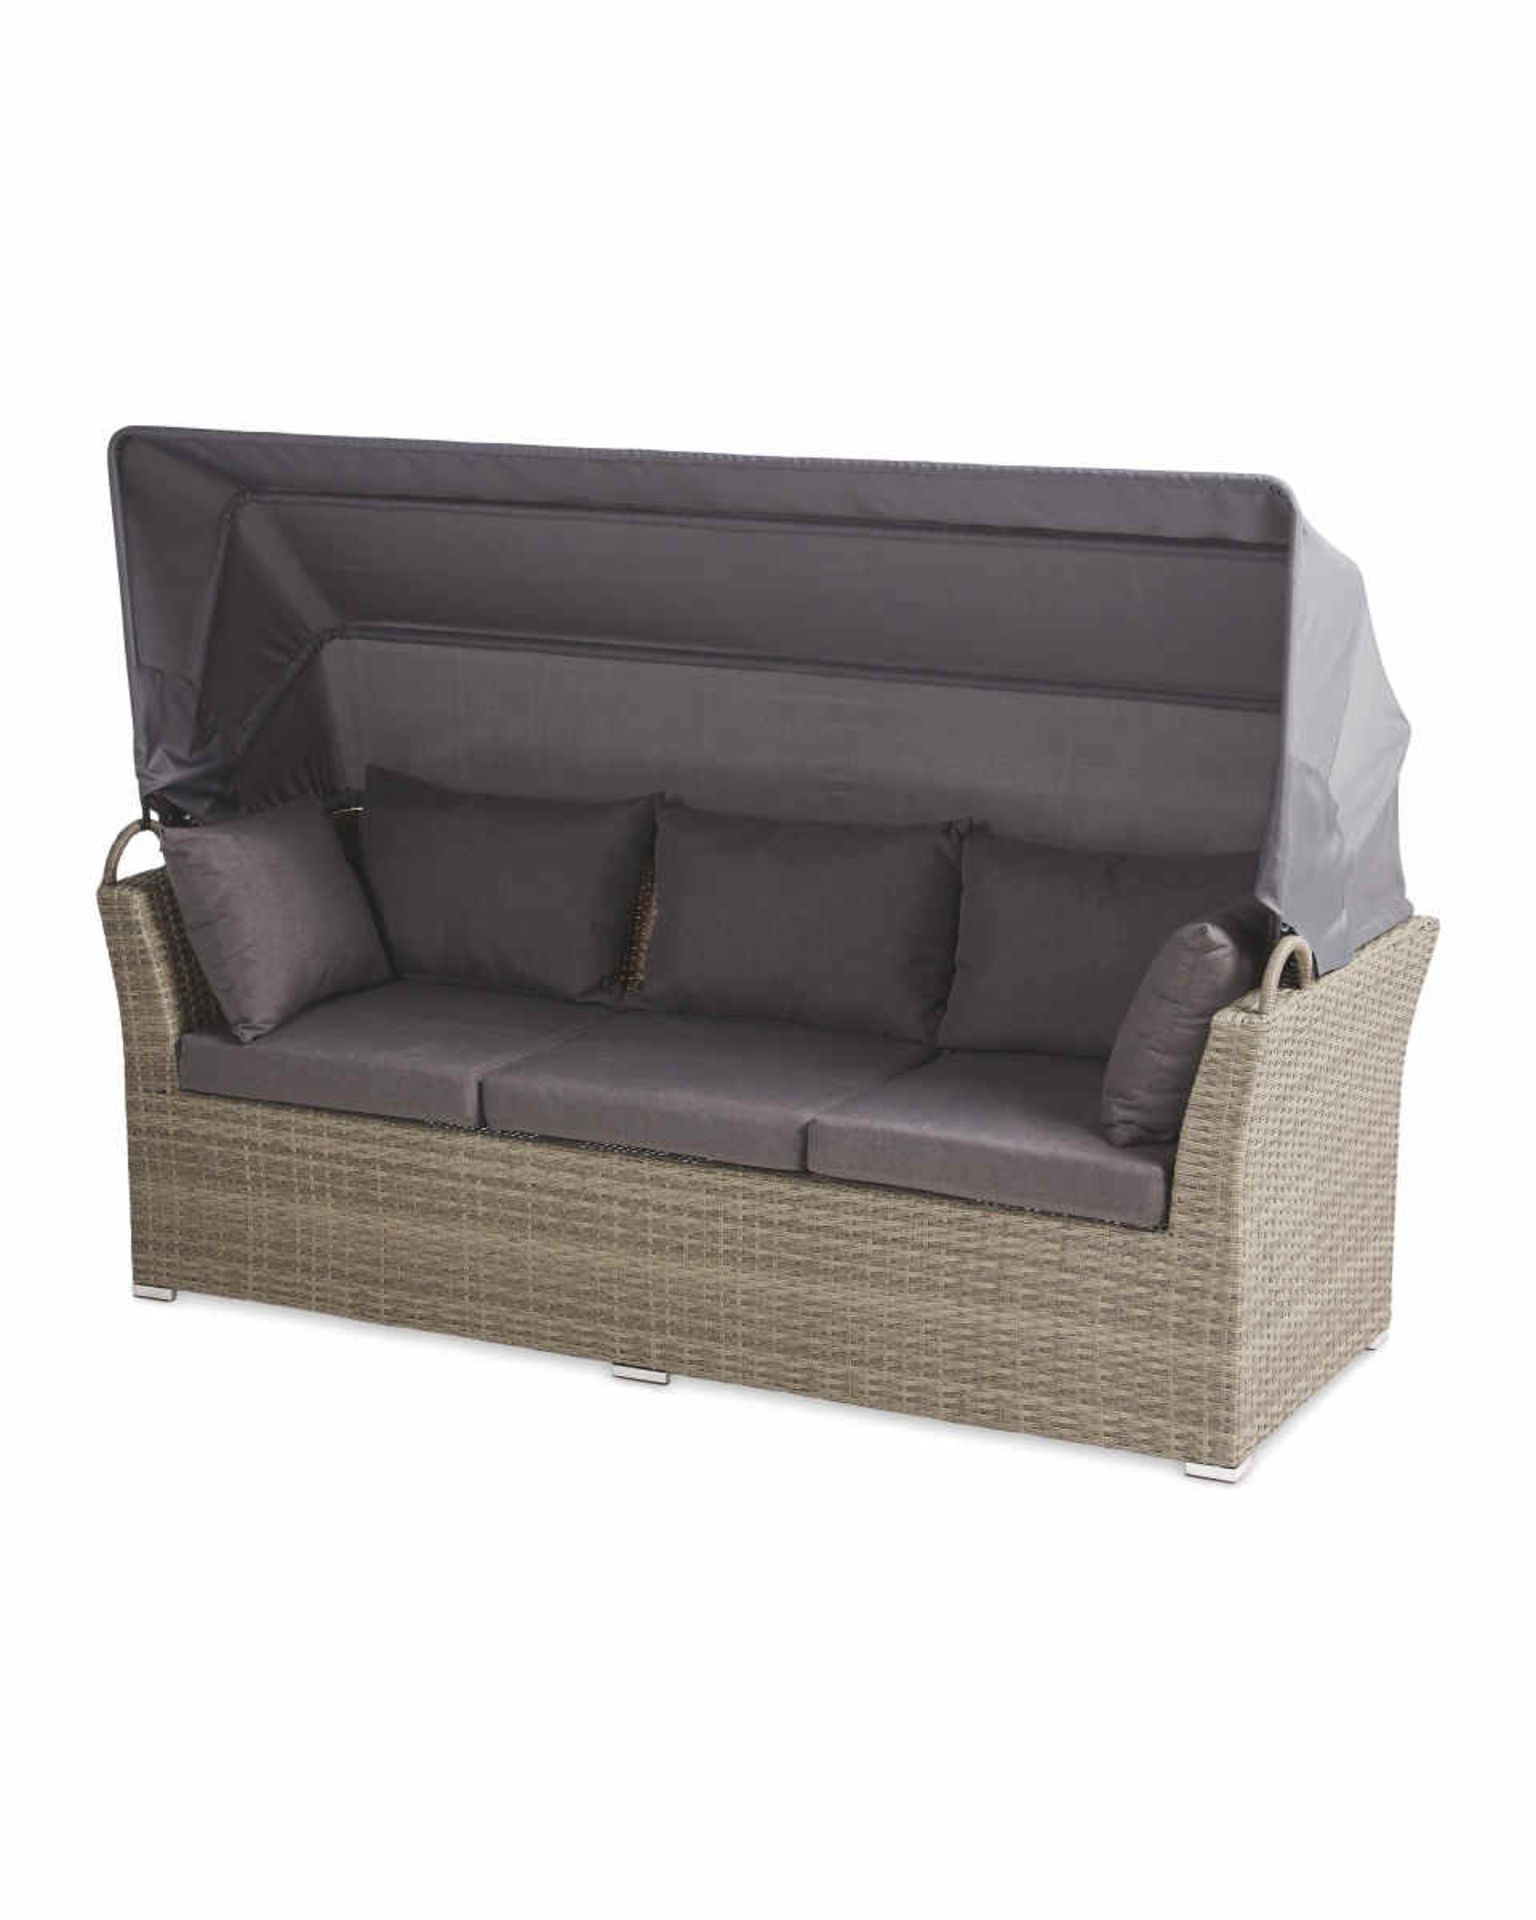 Rattan Effect Sofa Set with Canopy. - H/ST. Soak up the sun and feel that much needed summer - Image 3 of 3